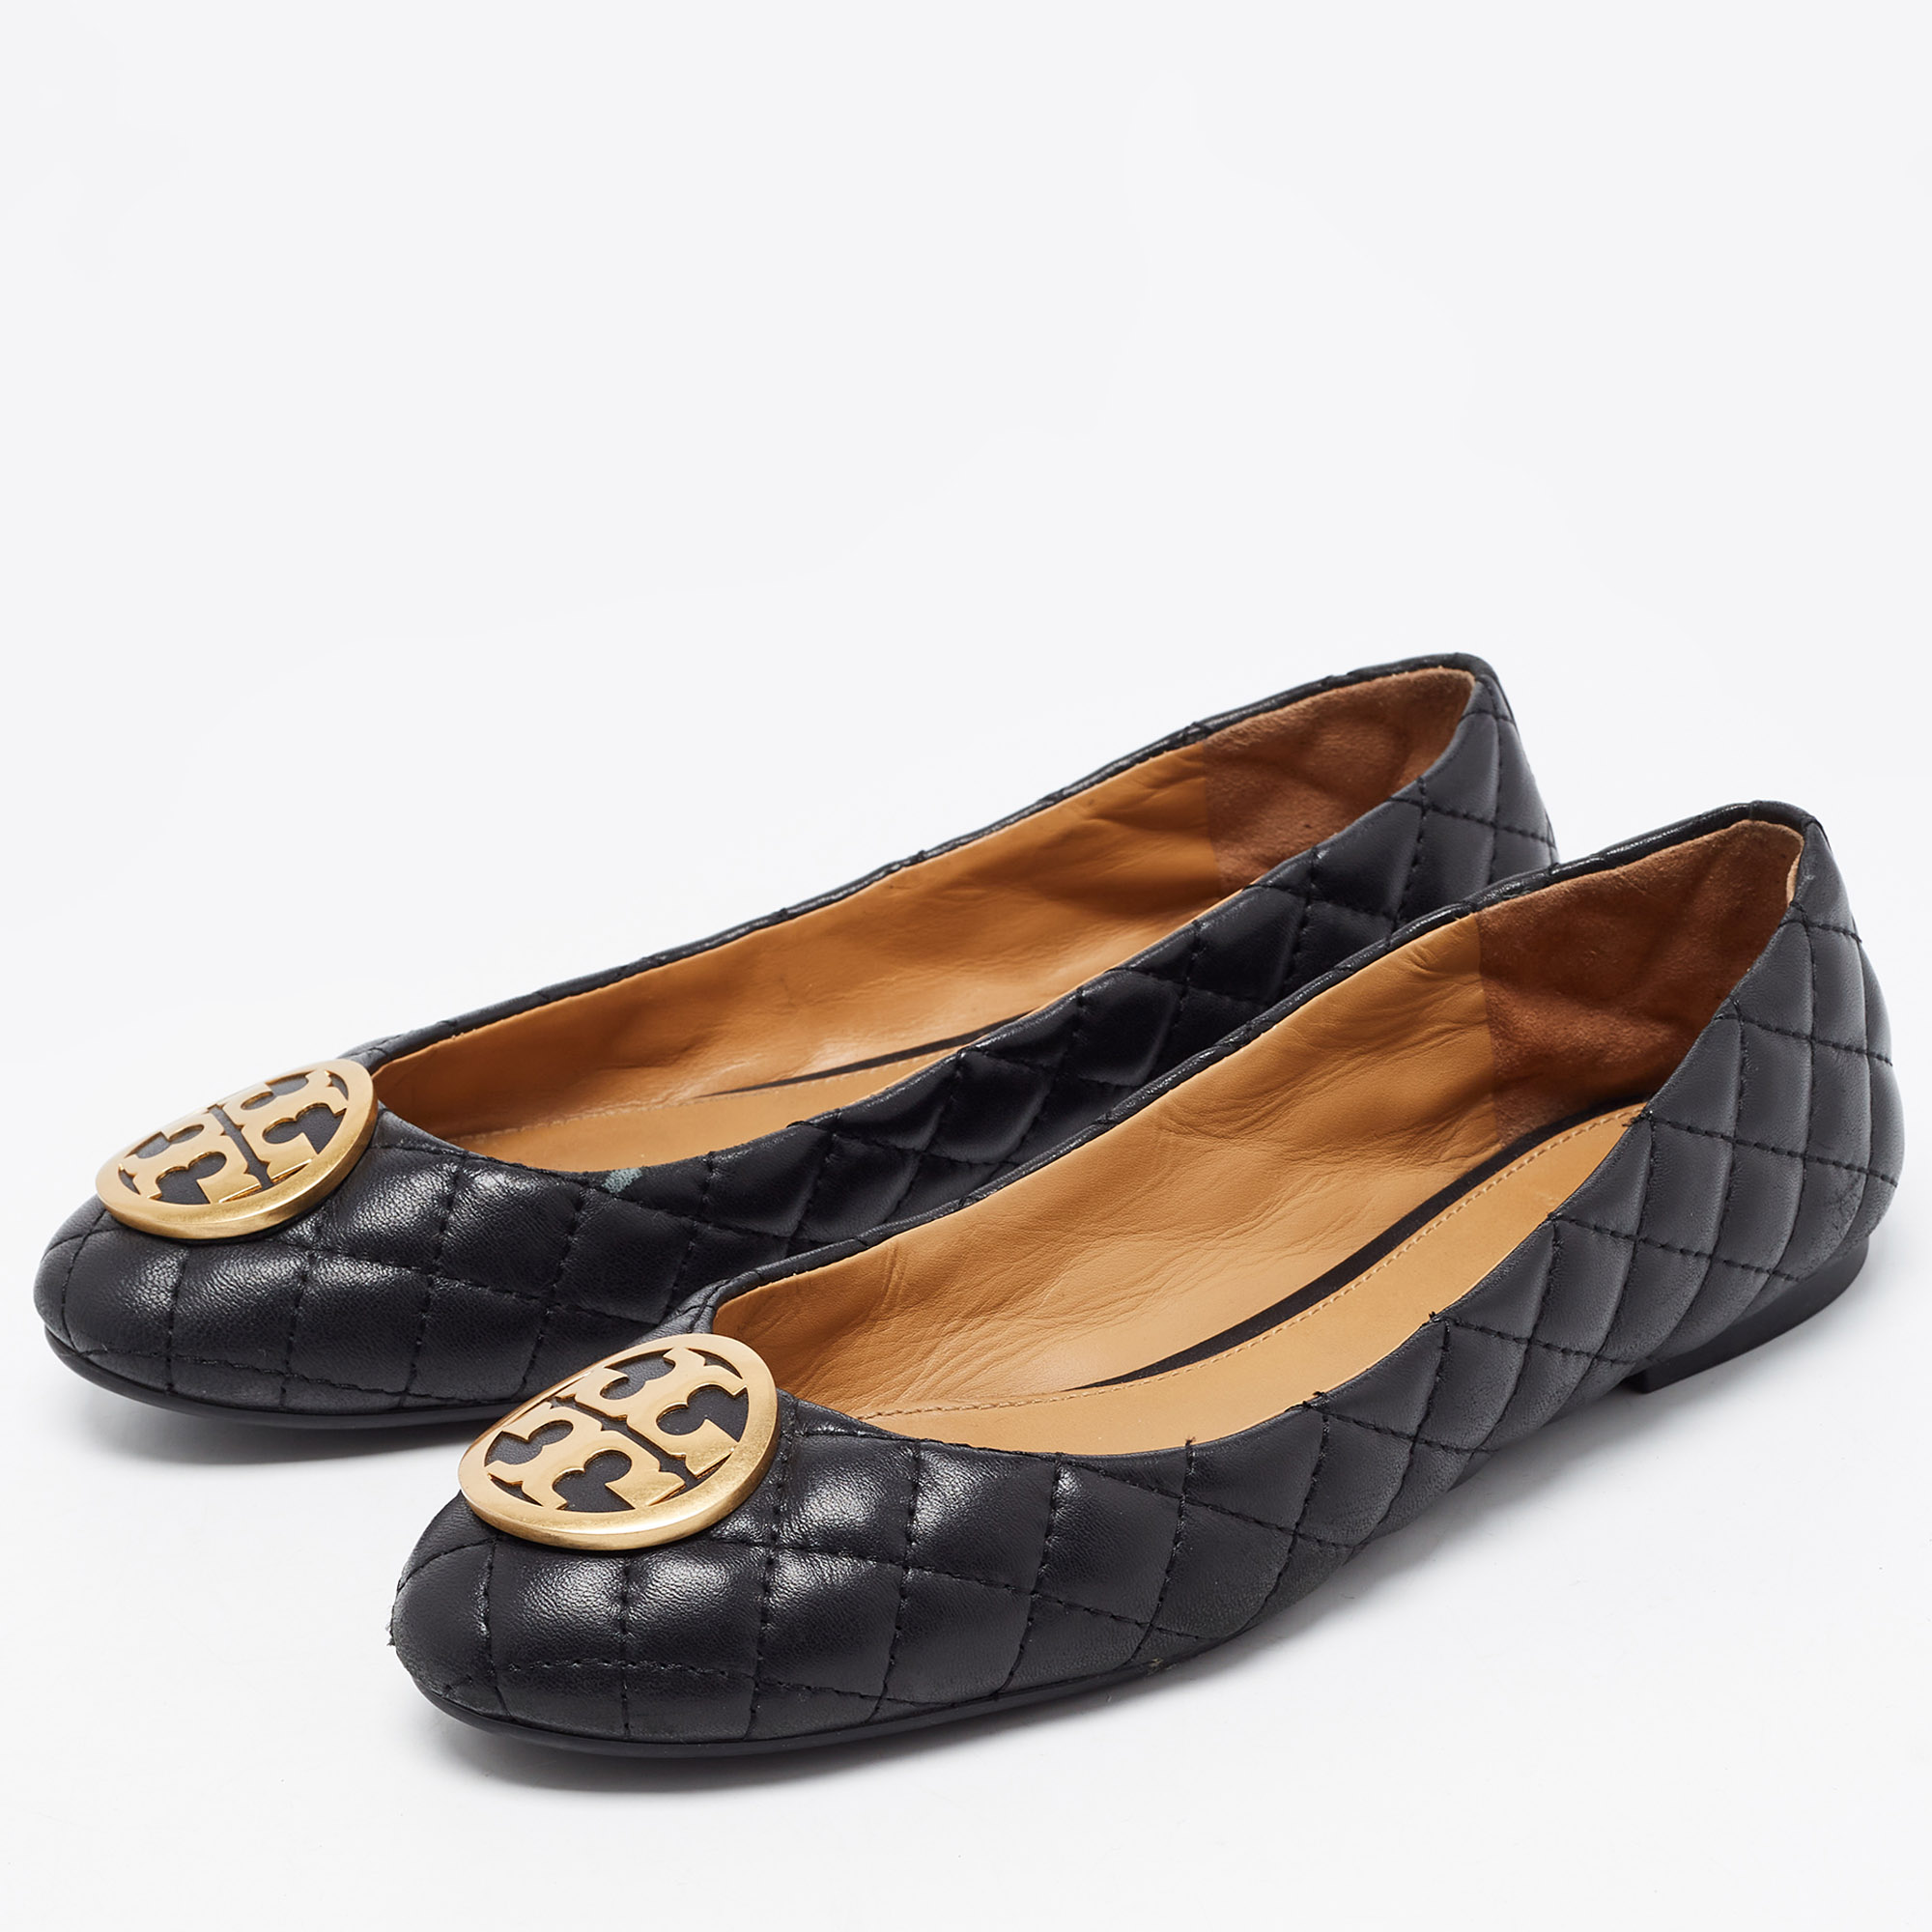 

Tory Burch Black Quilted Leather Benton Ballet Flats Size